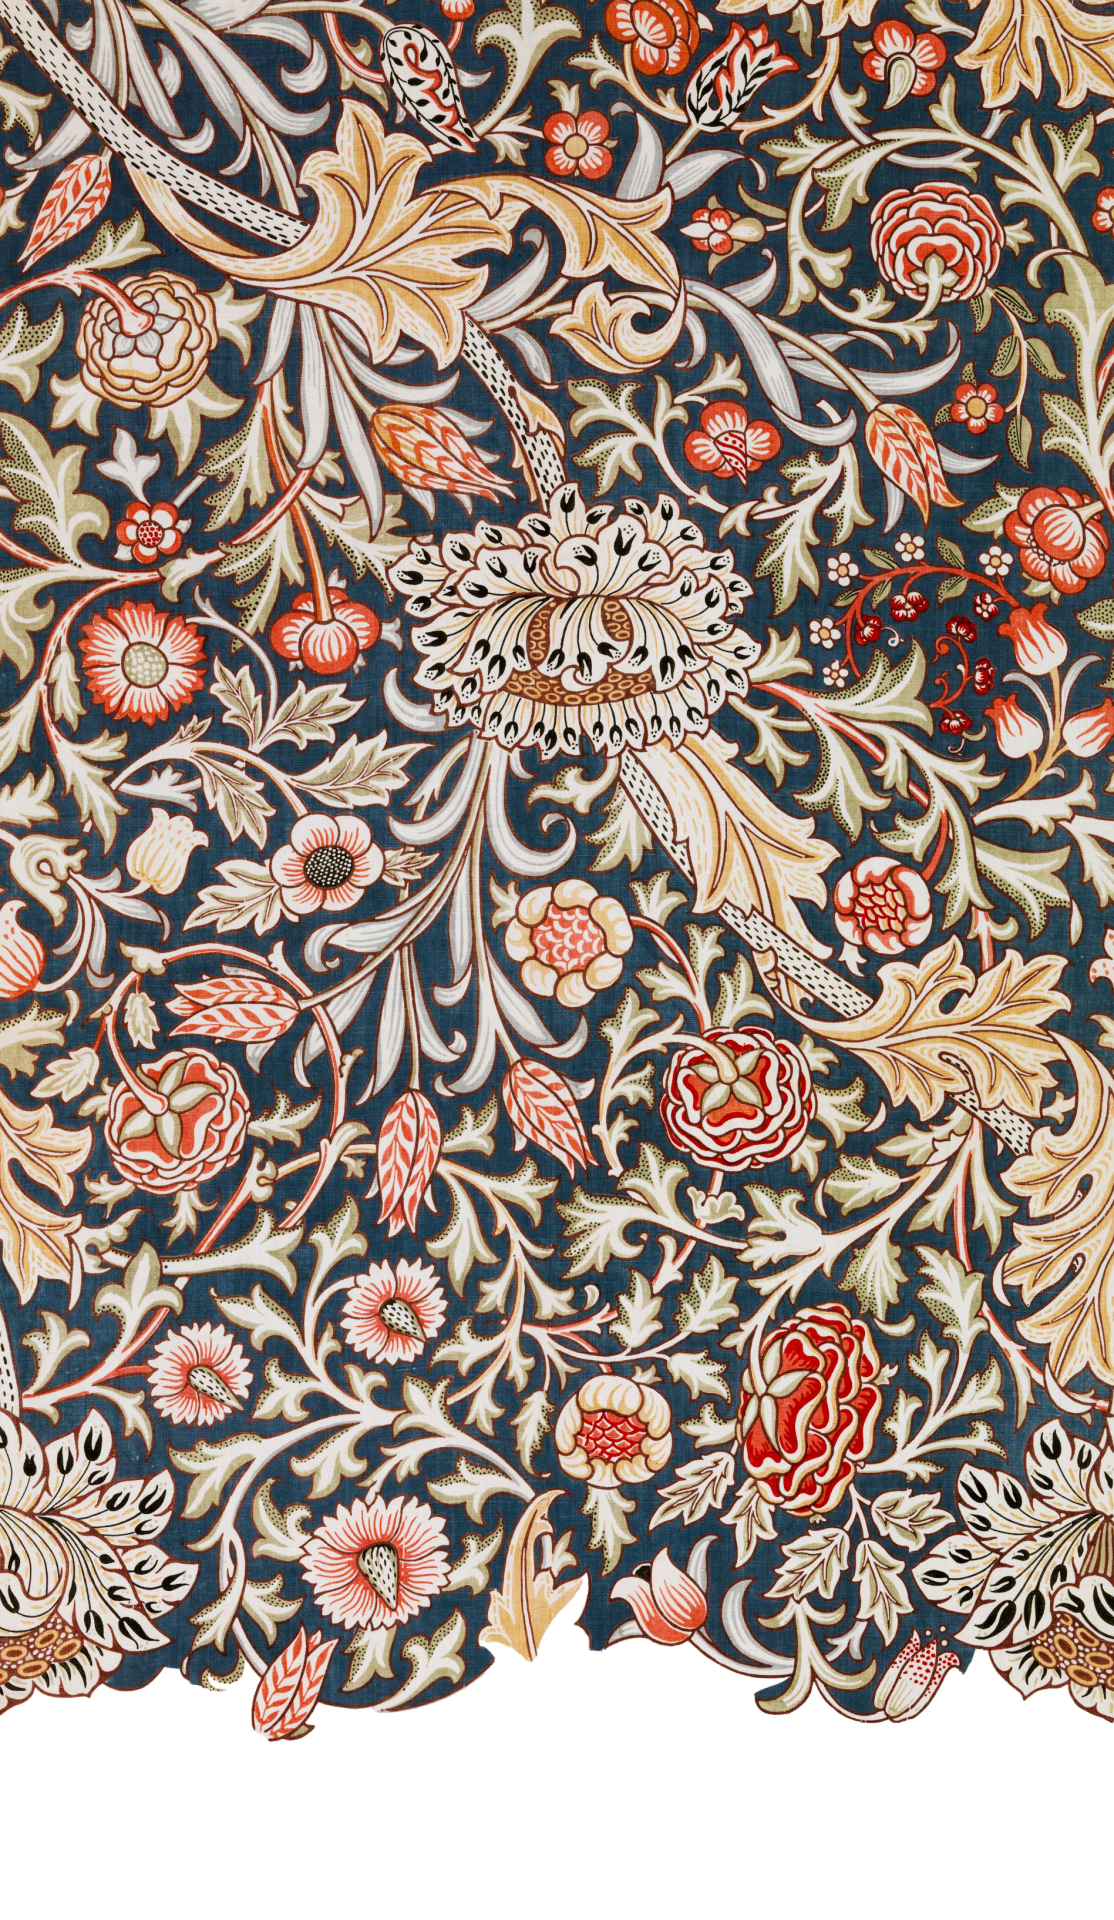 Re-colored by me, vintage floral textile fabric with a william morris floral design